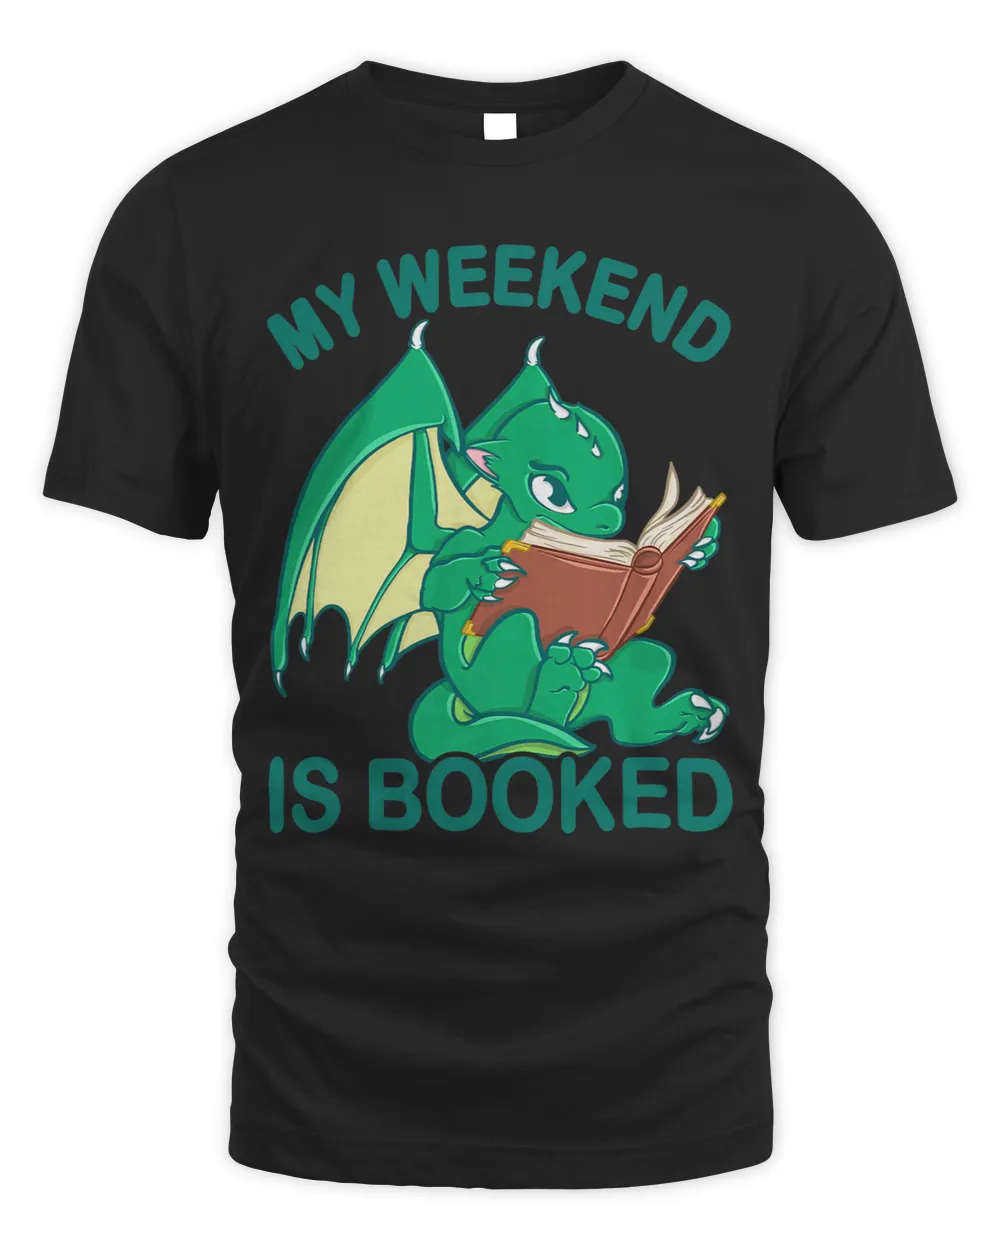 My weekend is Booked Nerdy Book Lover saying